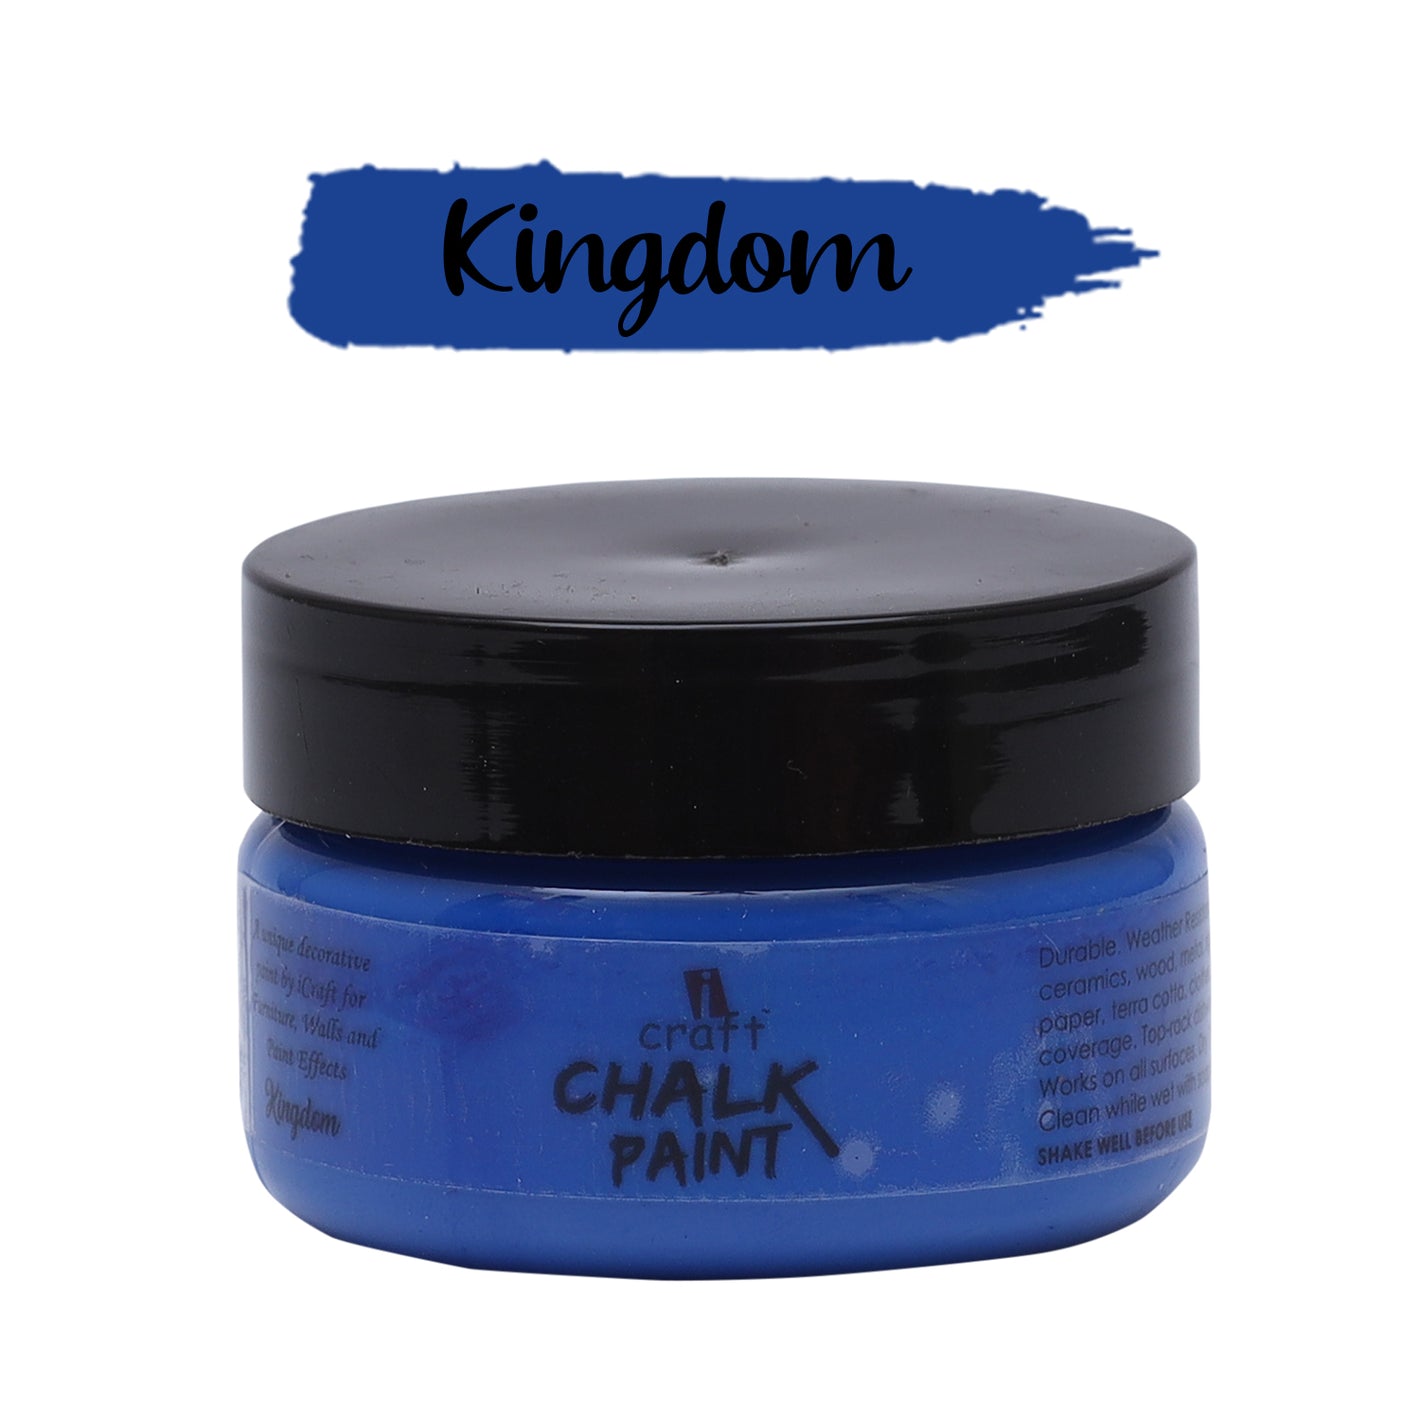 iCraft Premium Chalk Paint - Smooth, Creamy & Non-Toxic - Ideal for DIY & Resin Projects-50ml Kingdom